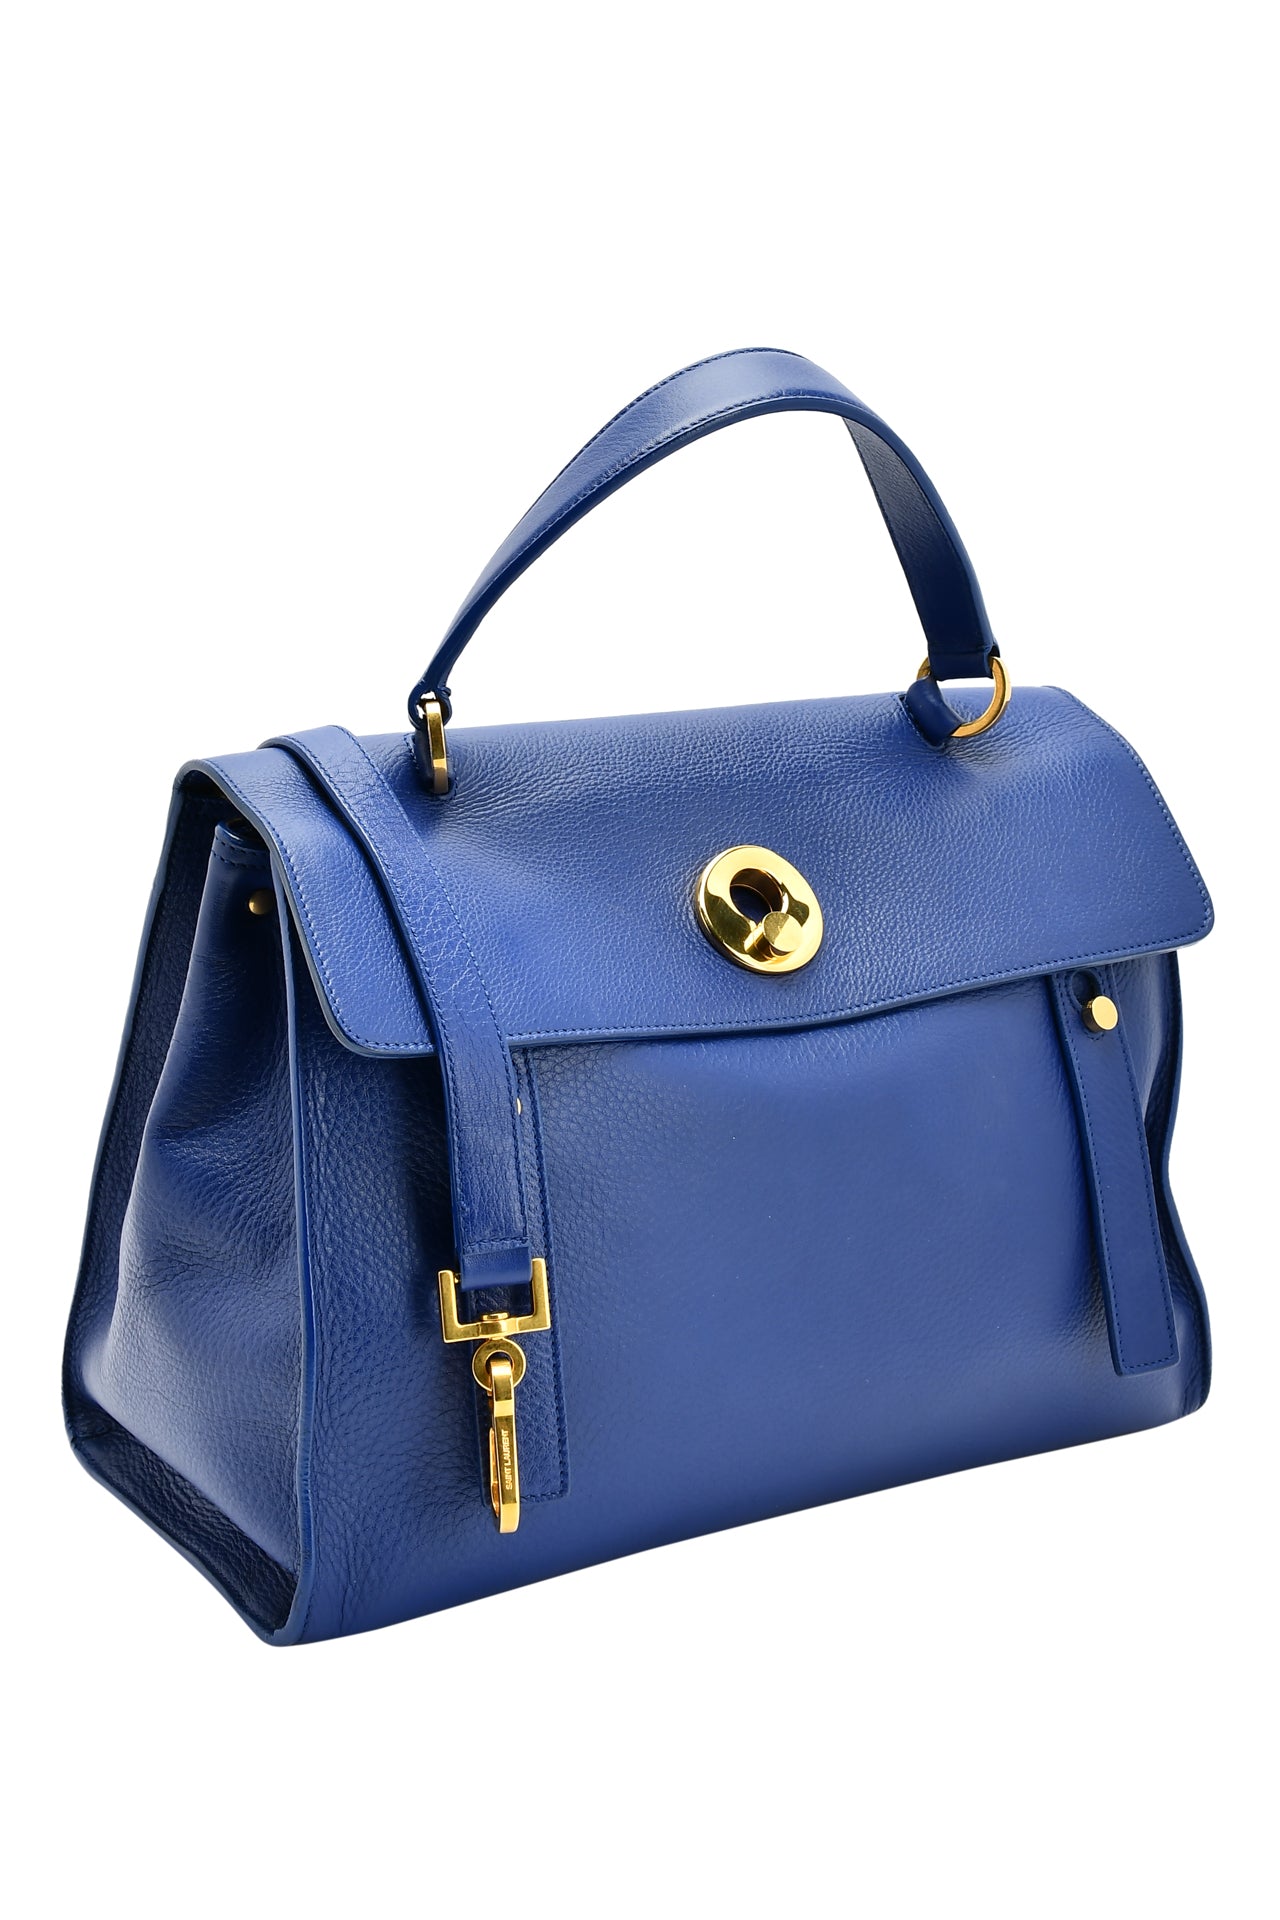 Saint Laurent Blue Leather And Canvas Muse Two Top Handle Bag